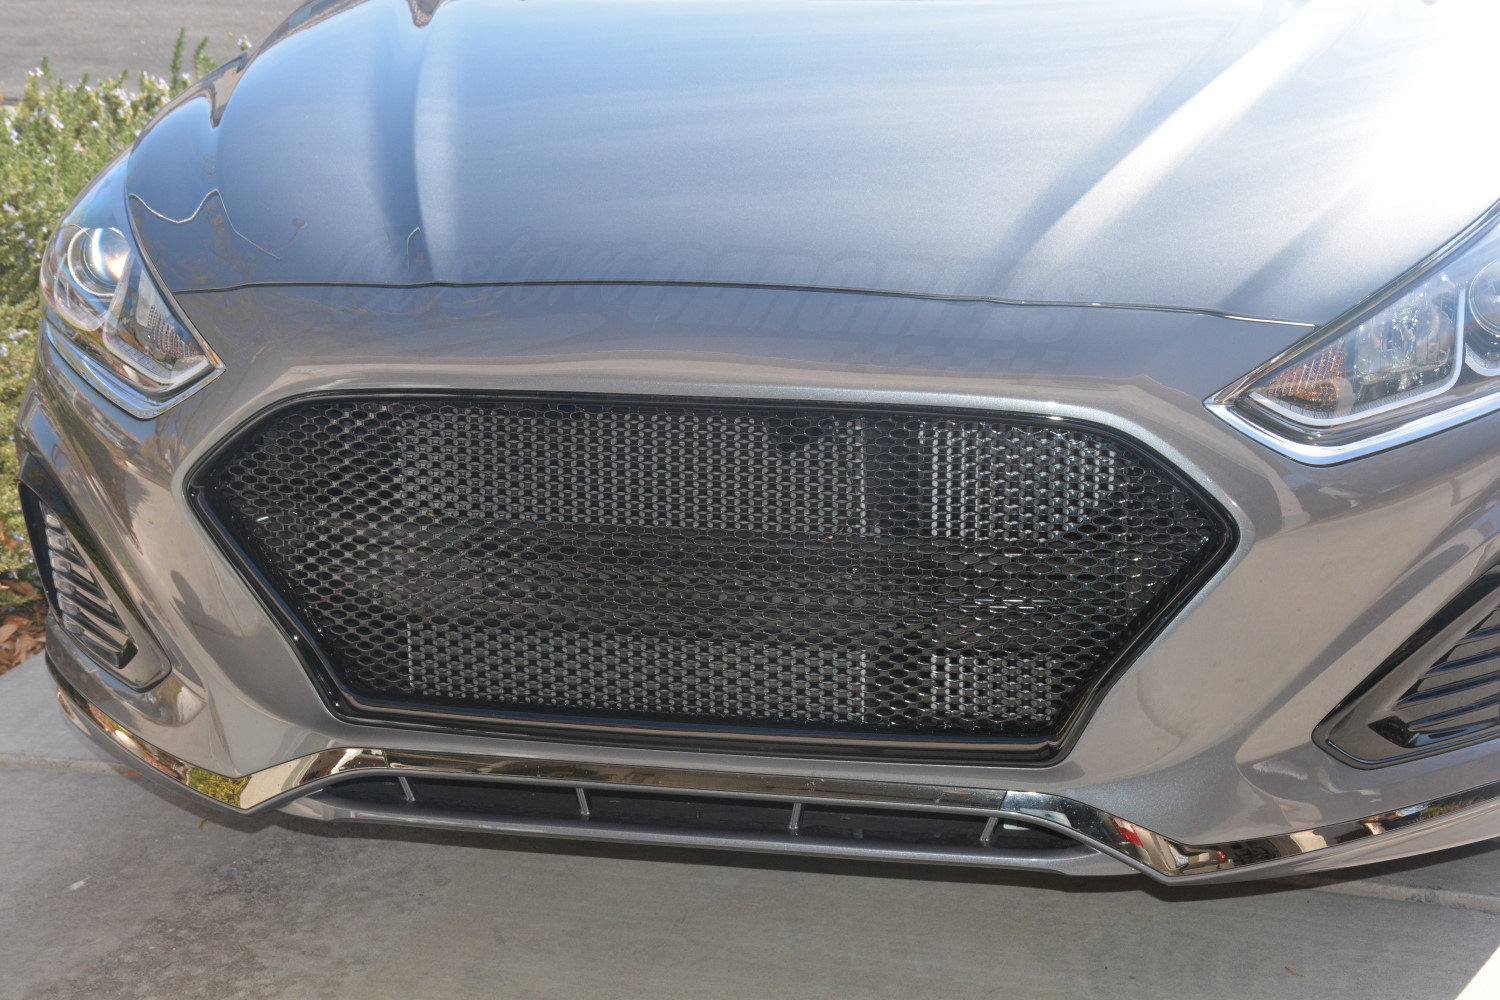 Get Ready to Turn Heads with Our Upcoming Gloss Black Mesh Grille for Hyundai Sonata